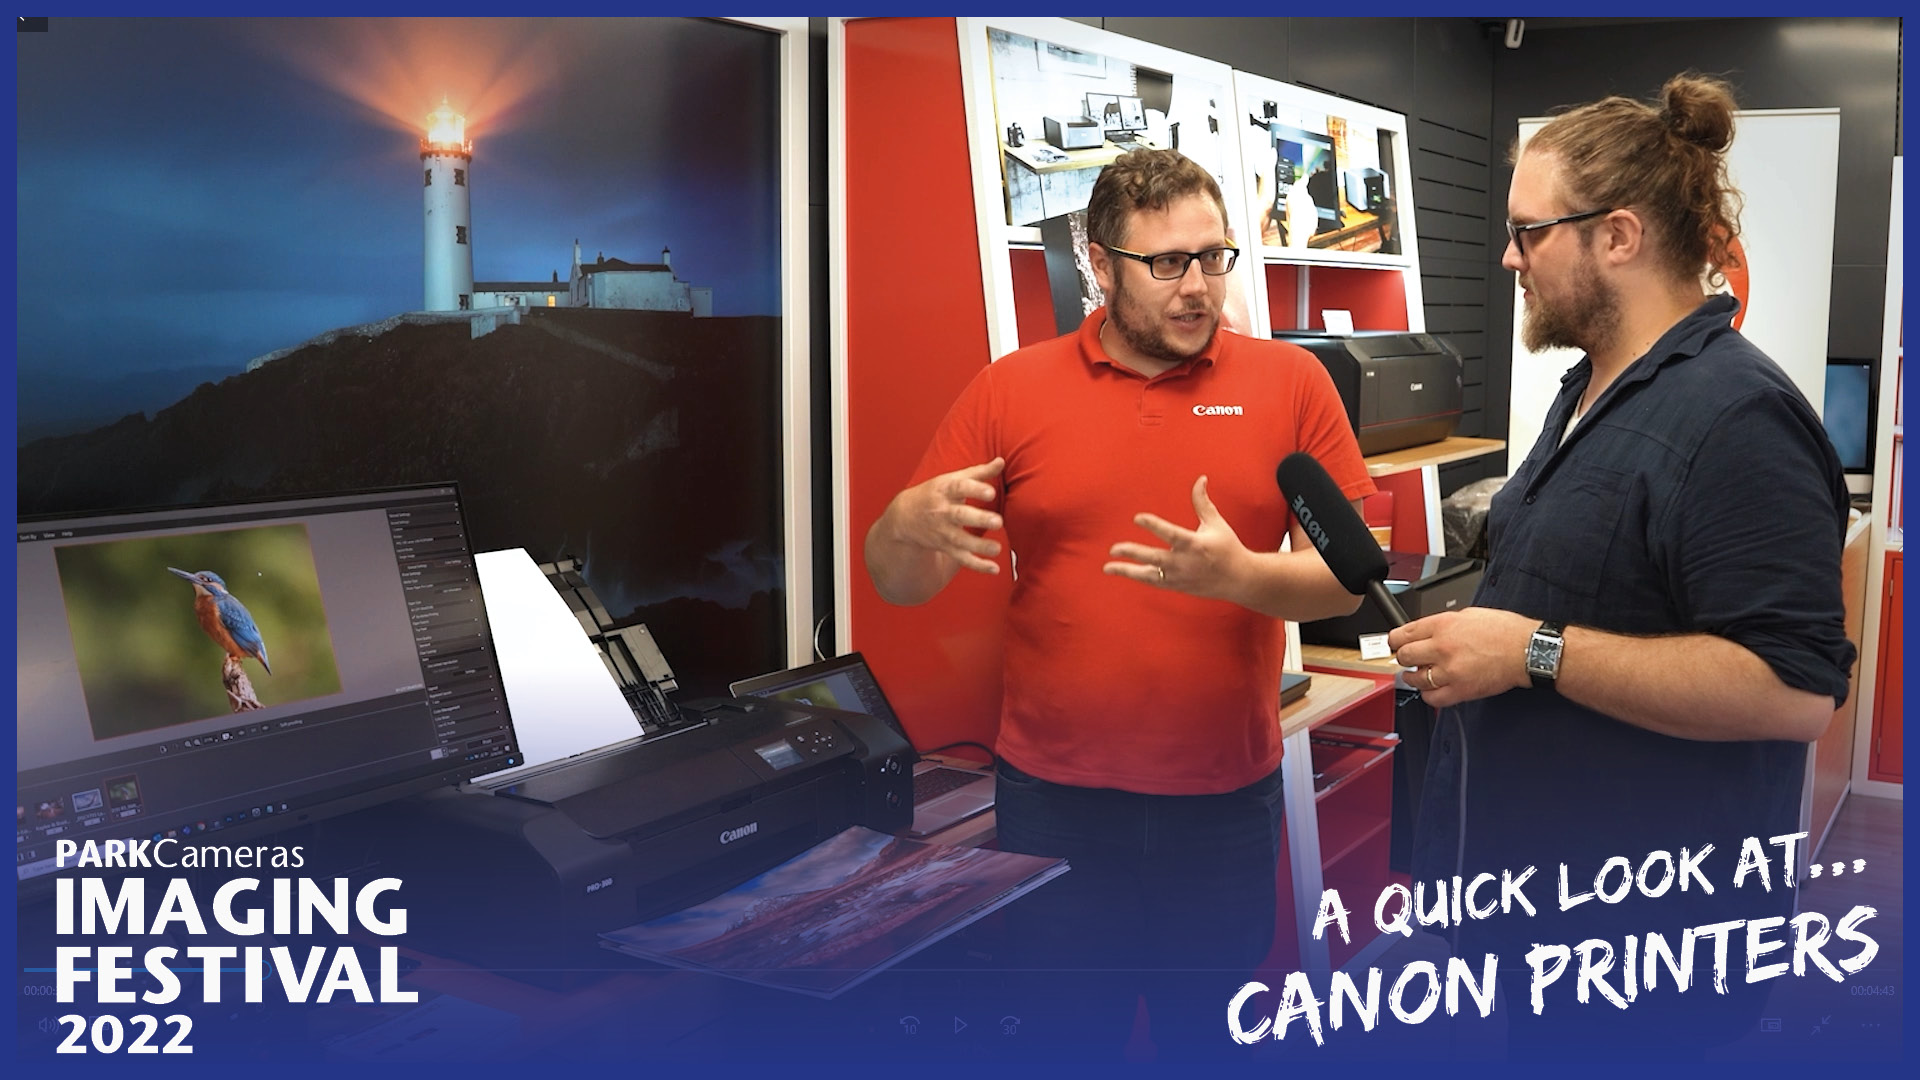 A quick look at ... Canon Printers | Imaging Festival 2022